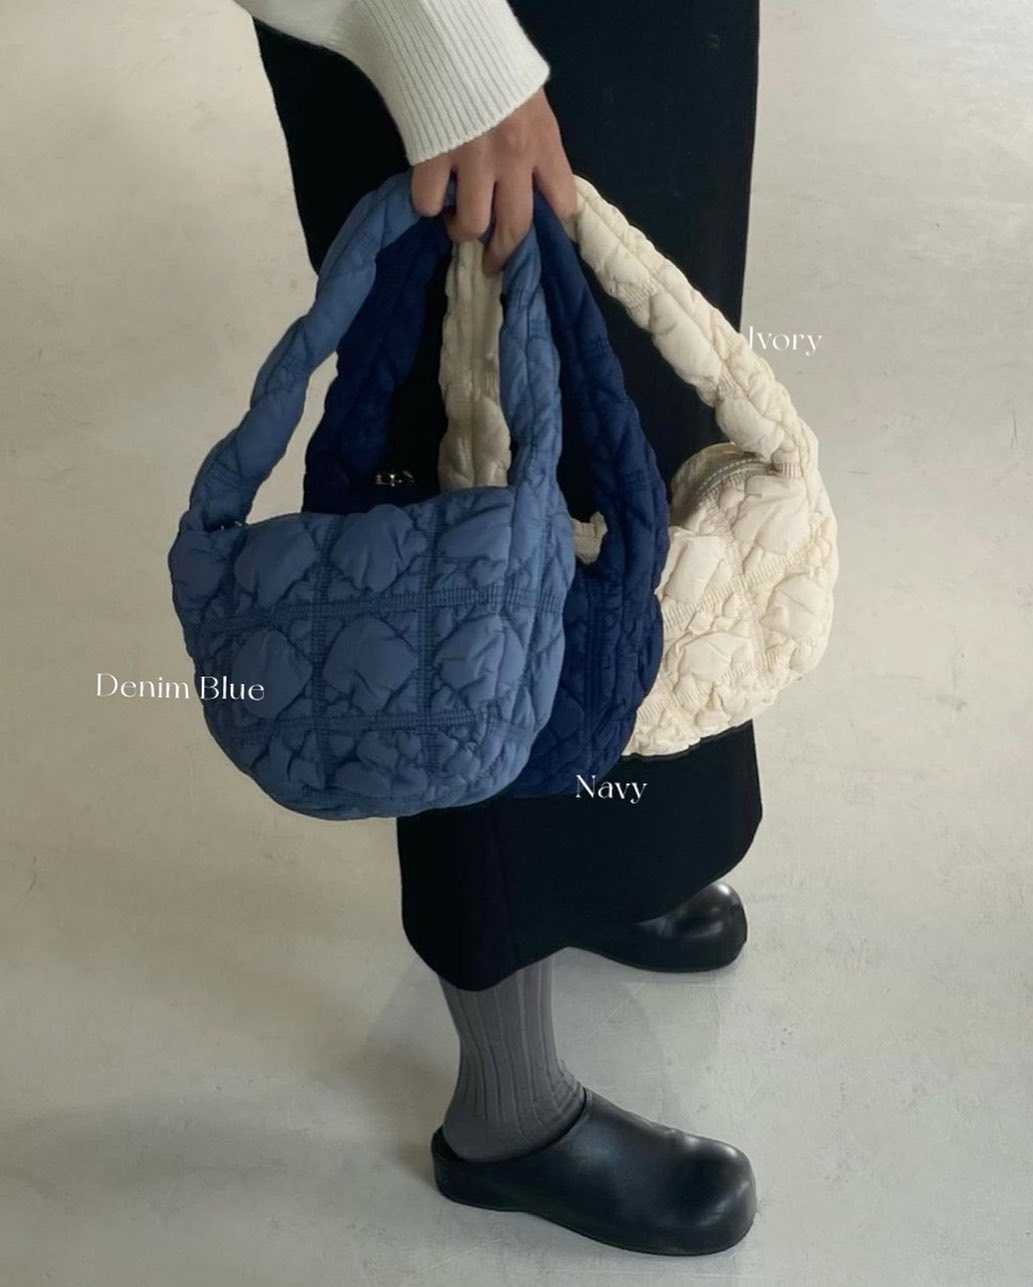 Where to buy the COS Quilted Bag and Carlyn Soft Bag everyone is